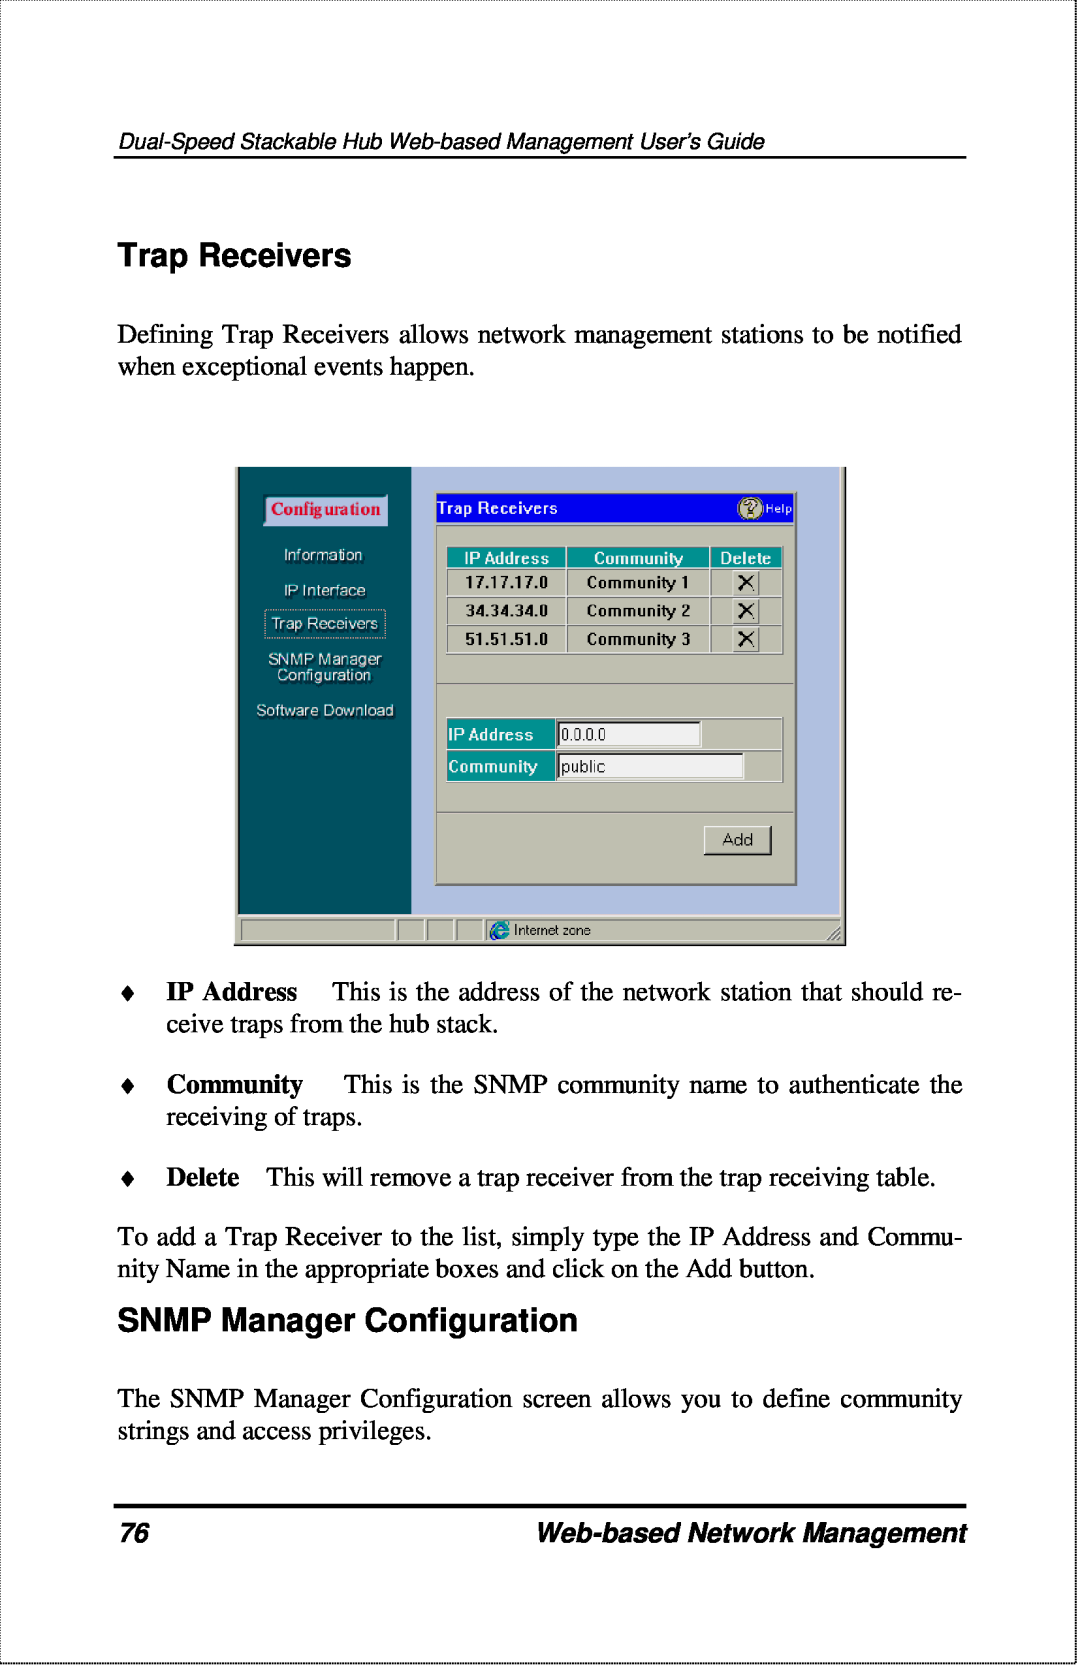 D-Link DFE-2600 manual Trap Receivers, SNMP Manager Configuration, Web-based Network Management 